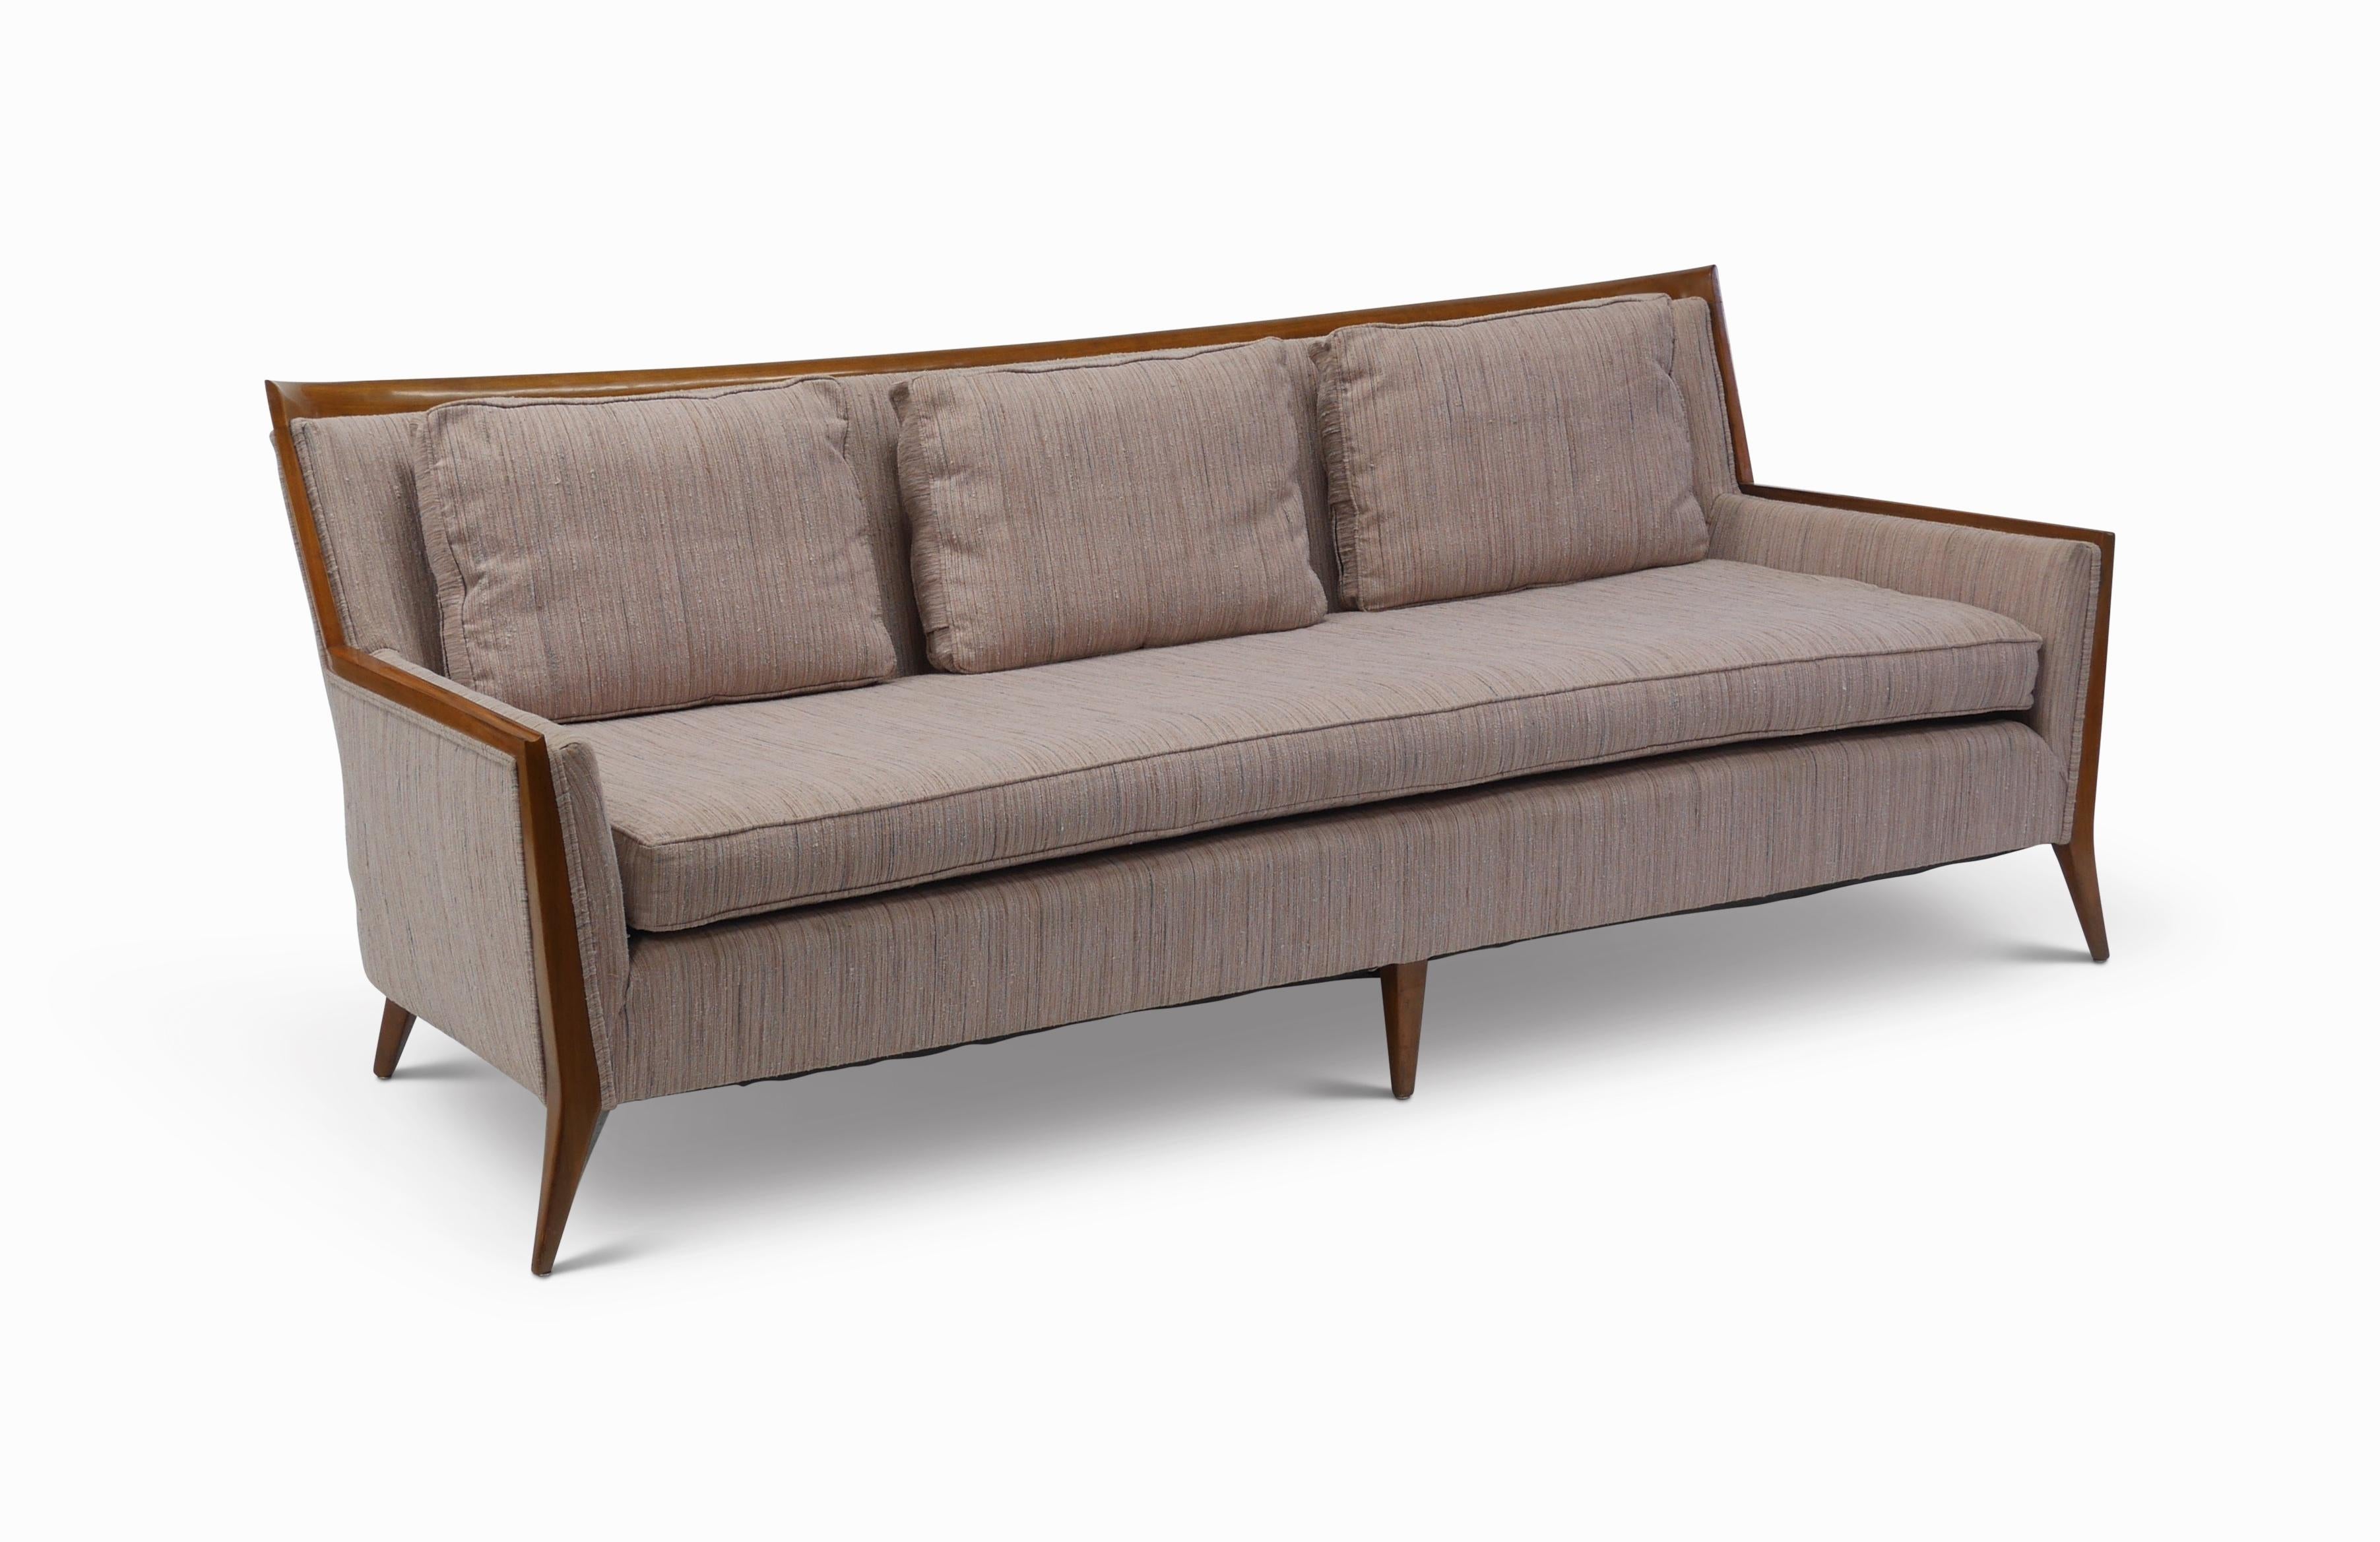 Rare to market Paul McCobb for Directional sofa # 407.
Model 407 was manufactured in small numbers due to the complexity and expense of the exposed walnut frame. The design encompasses many of the tenants of McCobb's design ethos, undeniably modern